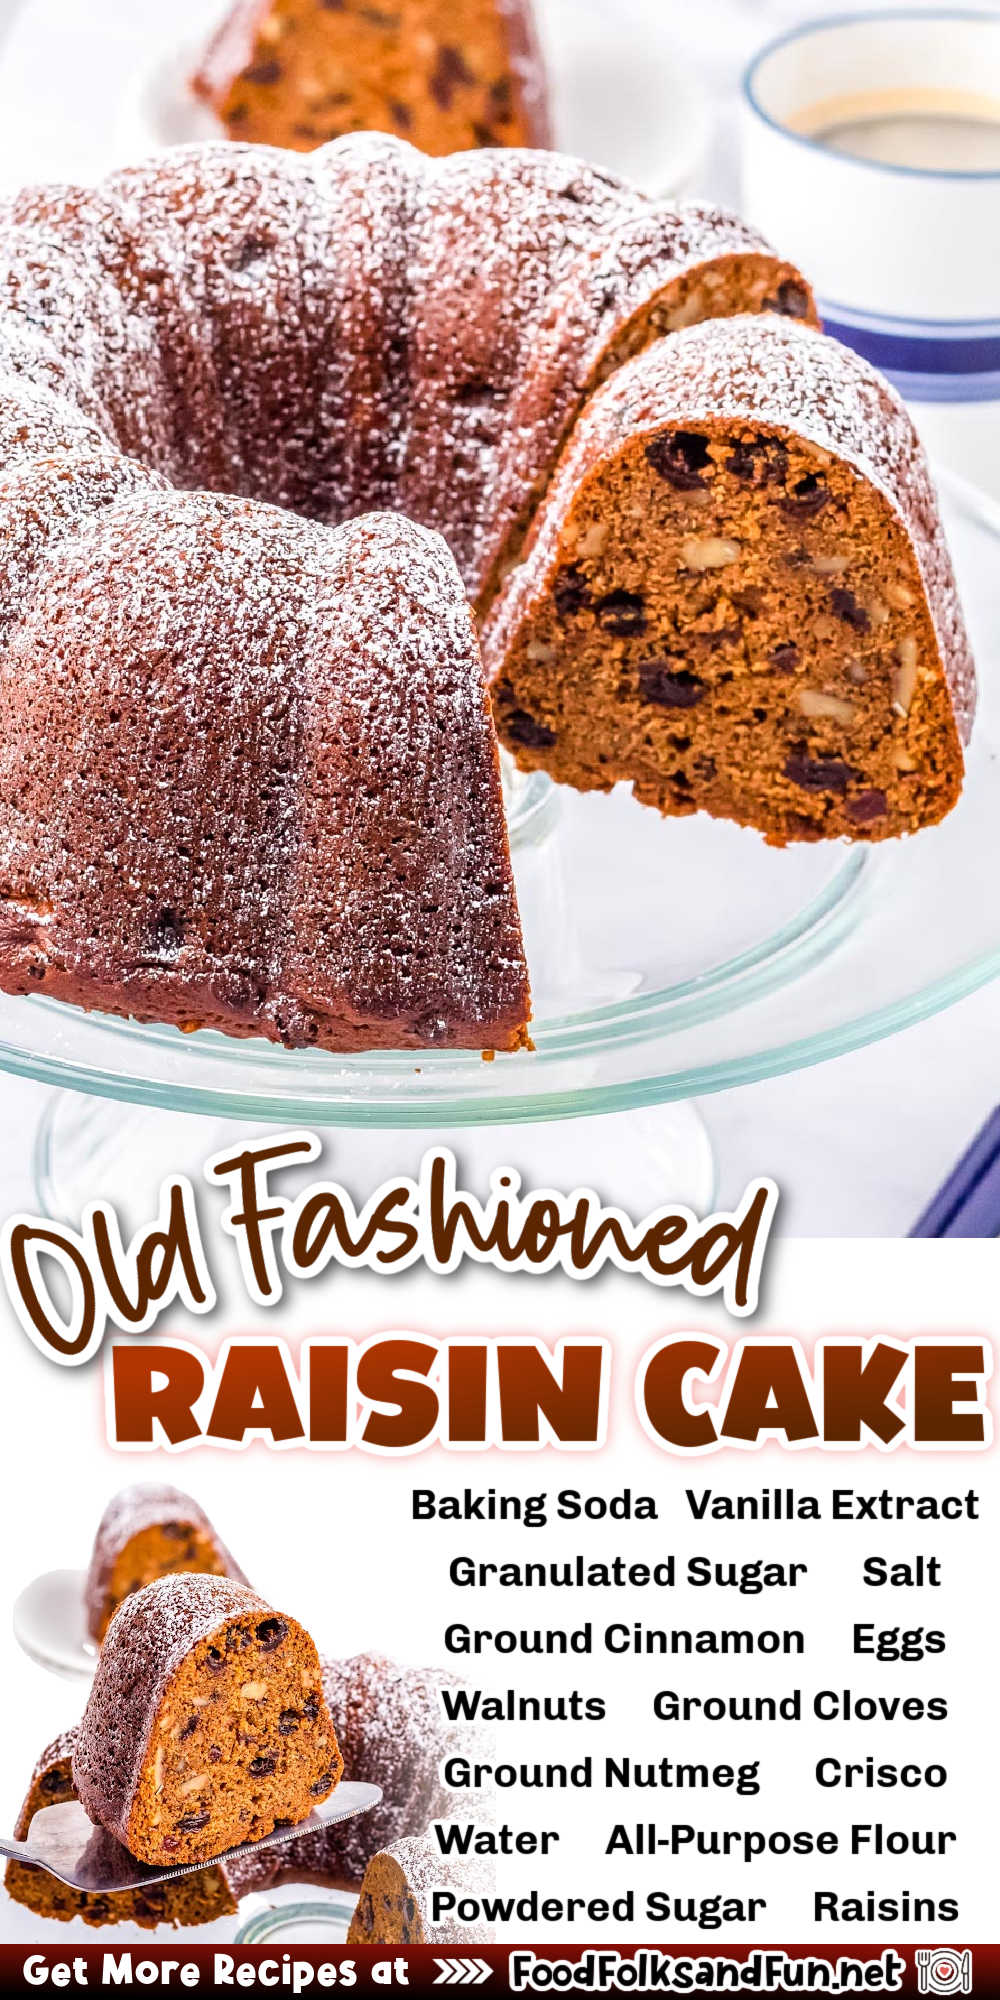 This old-fashioned Raisin Cake recipe is straight from my grandma’s recipe tin. It’s a slightly spiced bundt cake that’s tender and perfect for dessert or breakfast. via @foodfolksandfun